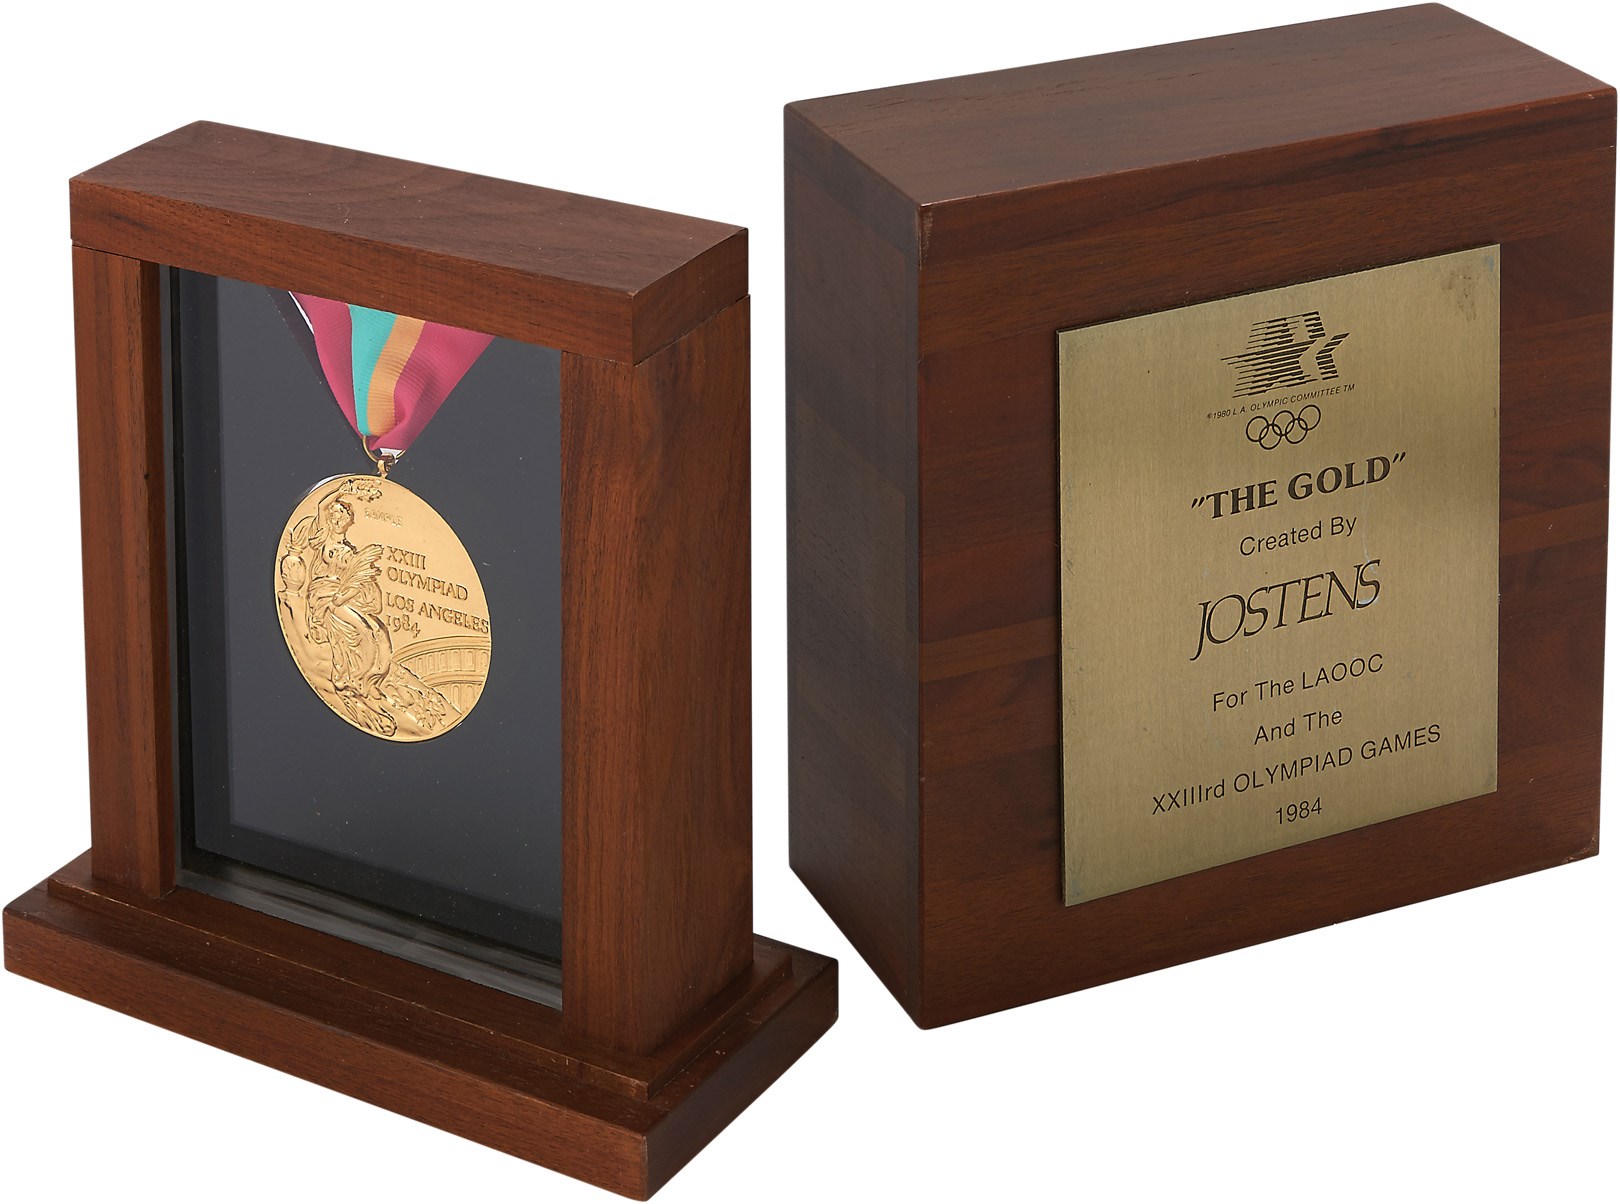 Olympics and All Sports - 1984 Los Angeles Summer Olympics Gold Medal in Jostens Presentational Box